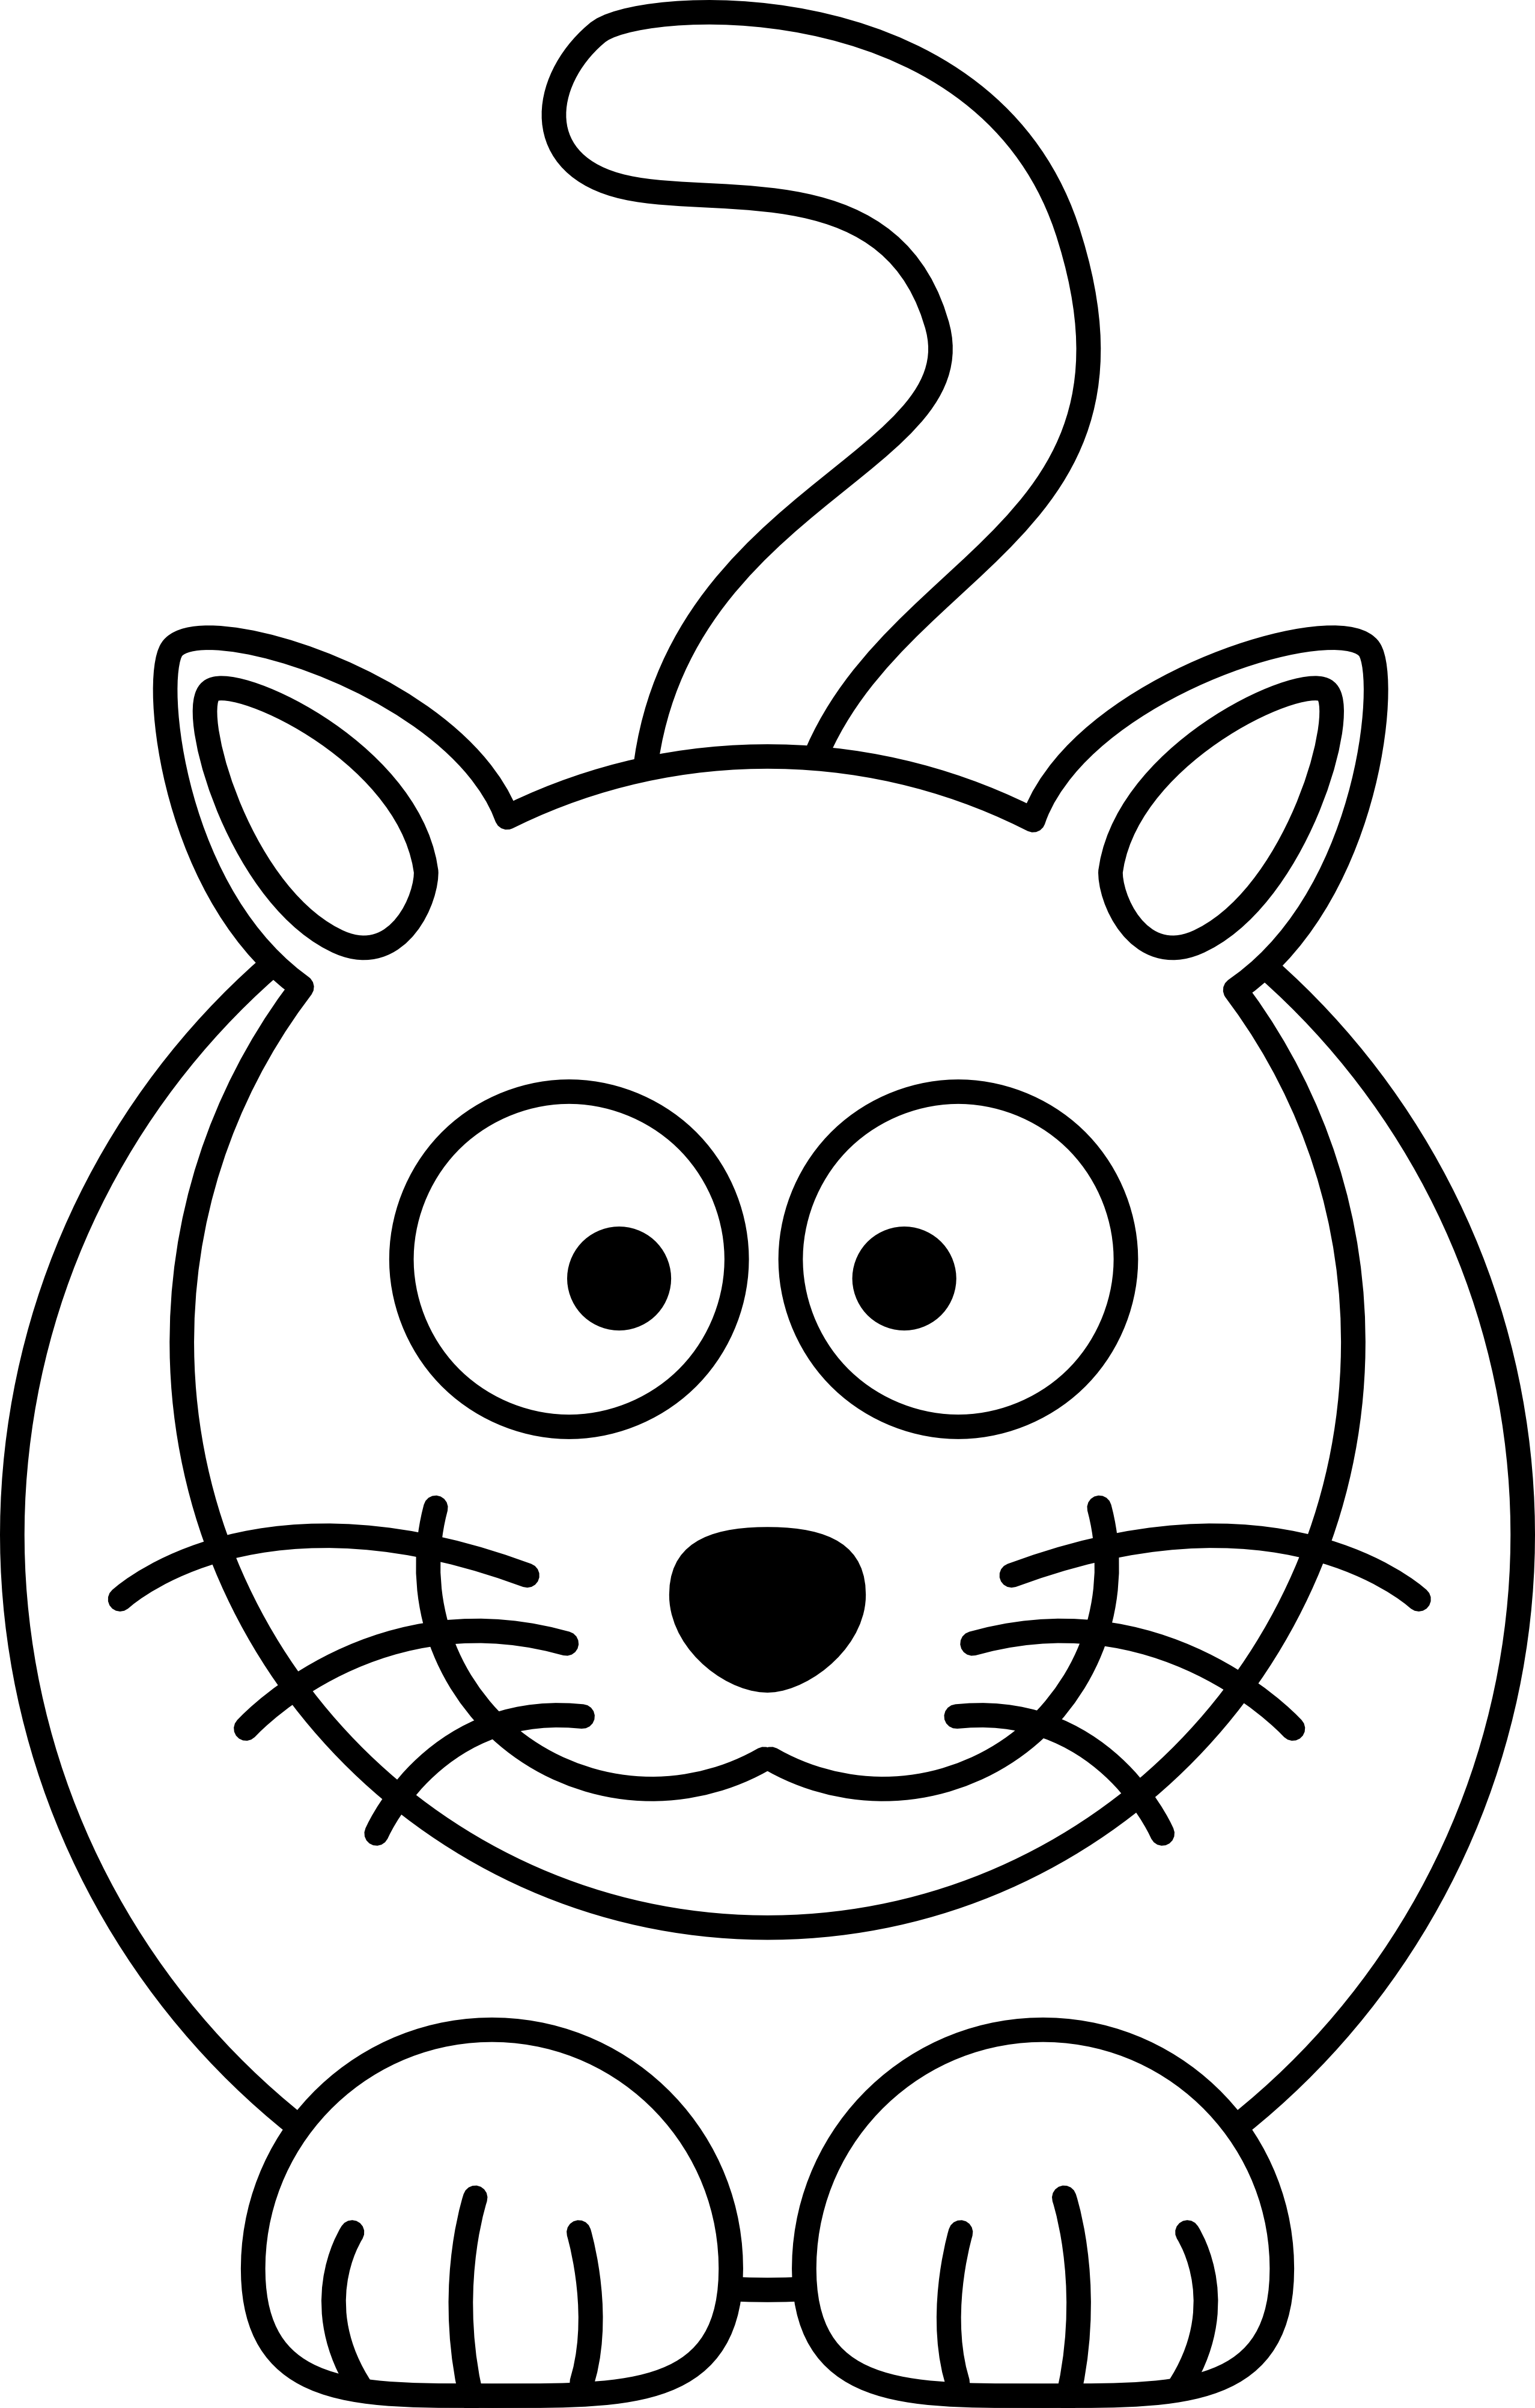 Cat Clipart to Download - dbclipart.com